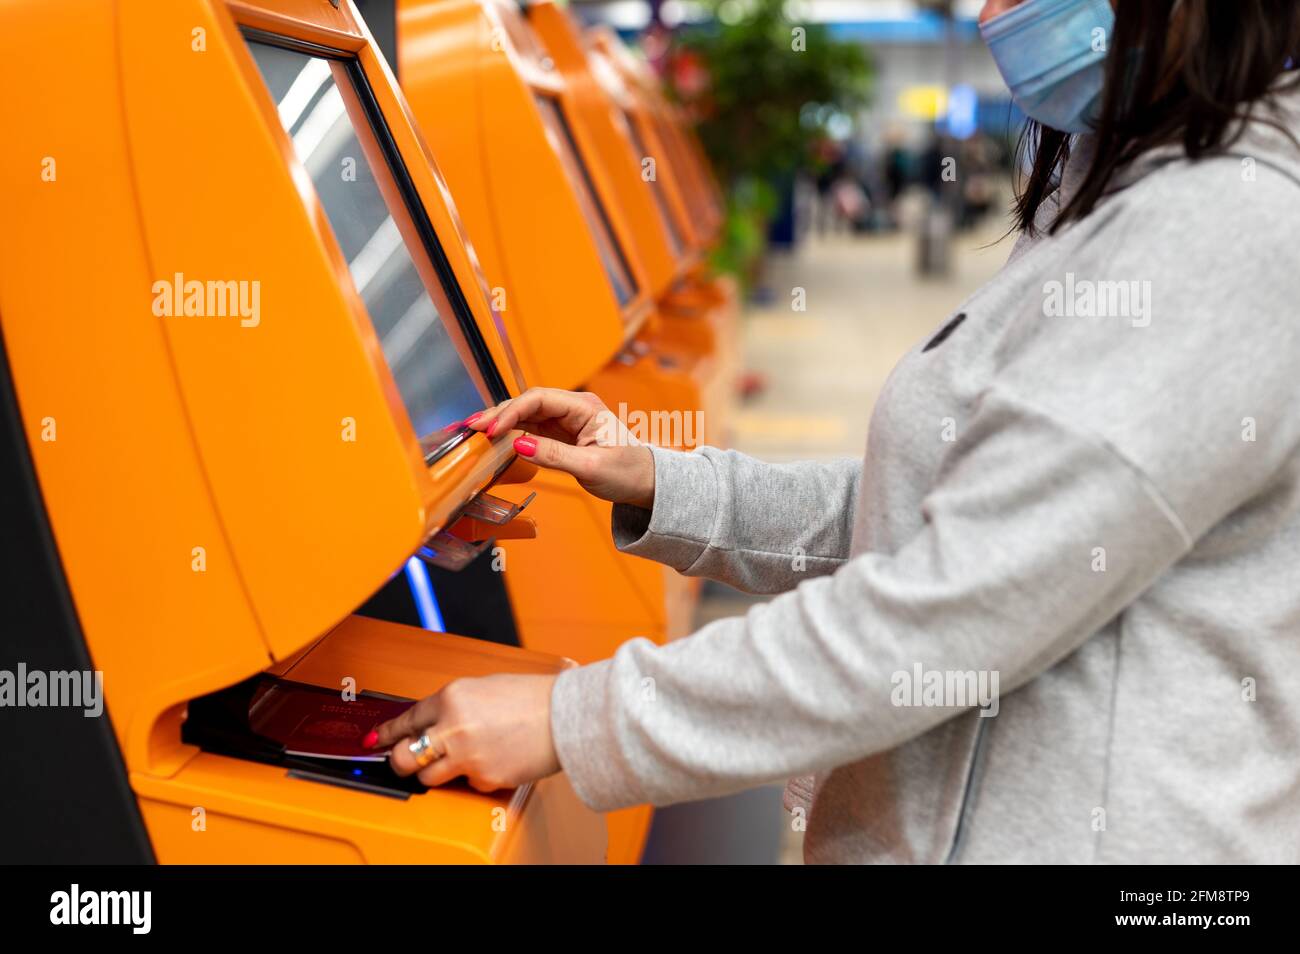 woman scans her passport at the airline counter for self check-in at the airport. woman doing self-registration for flight. Self service machine kiosk Stock Photo